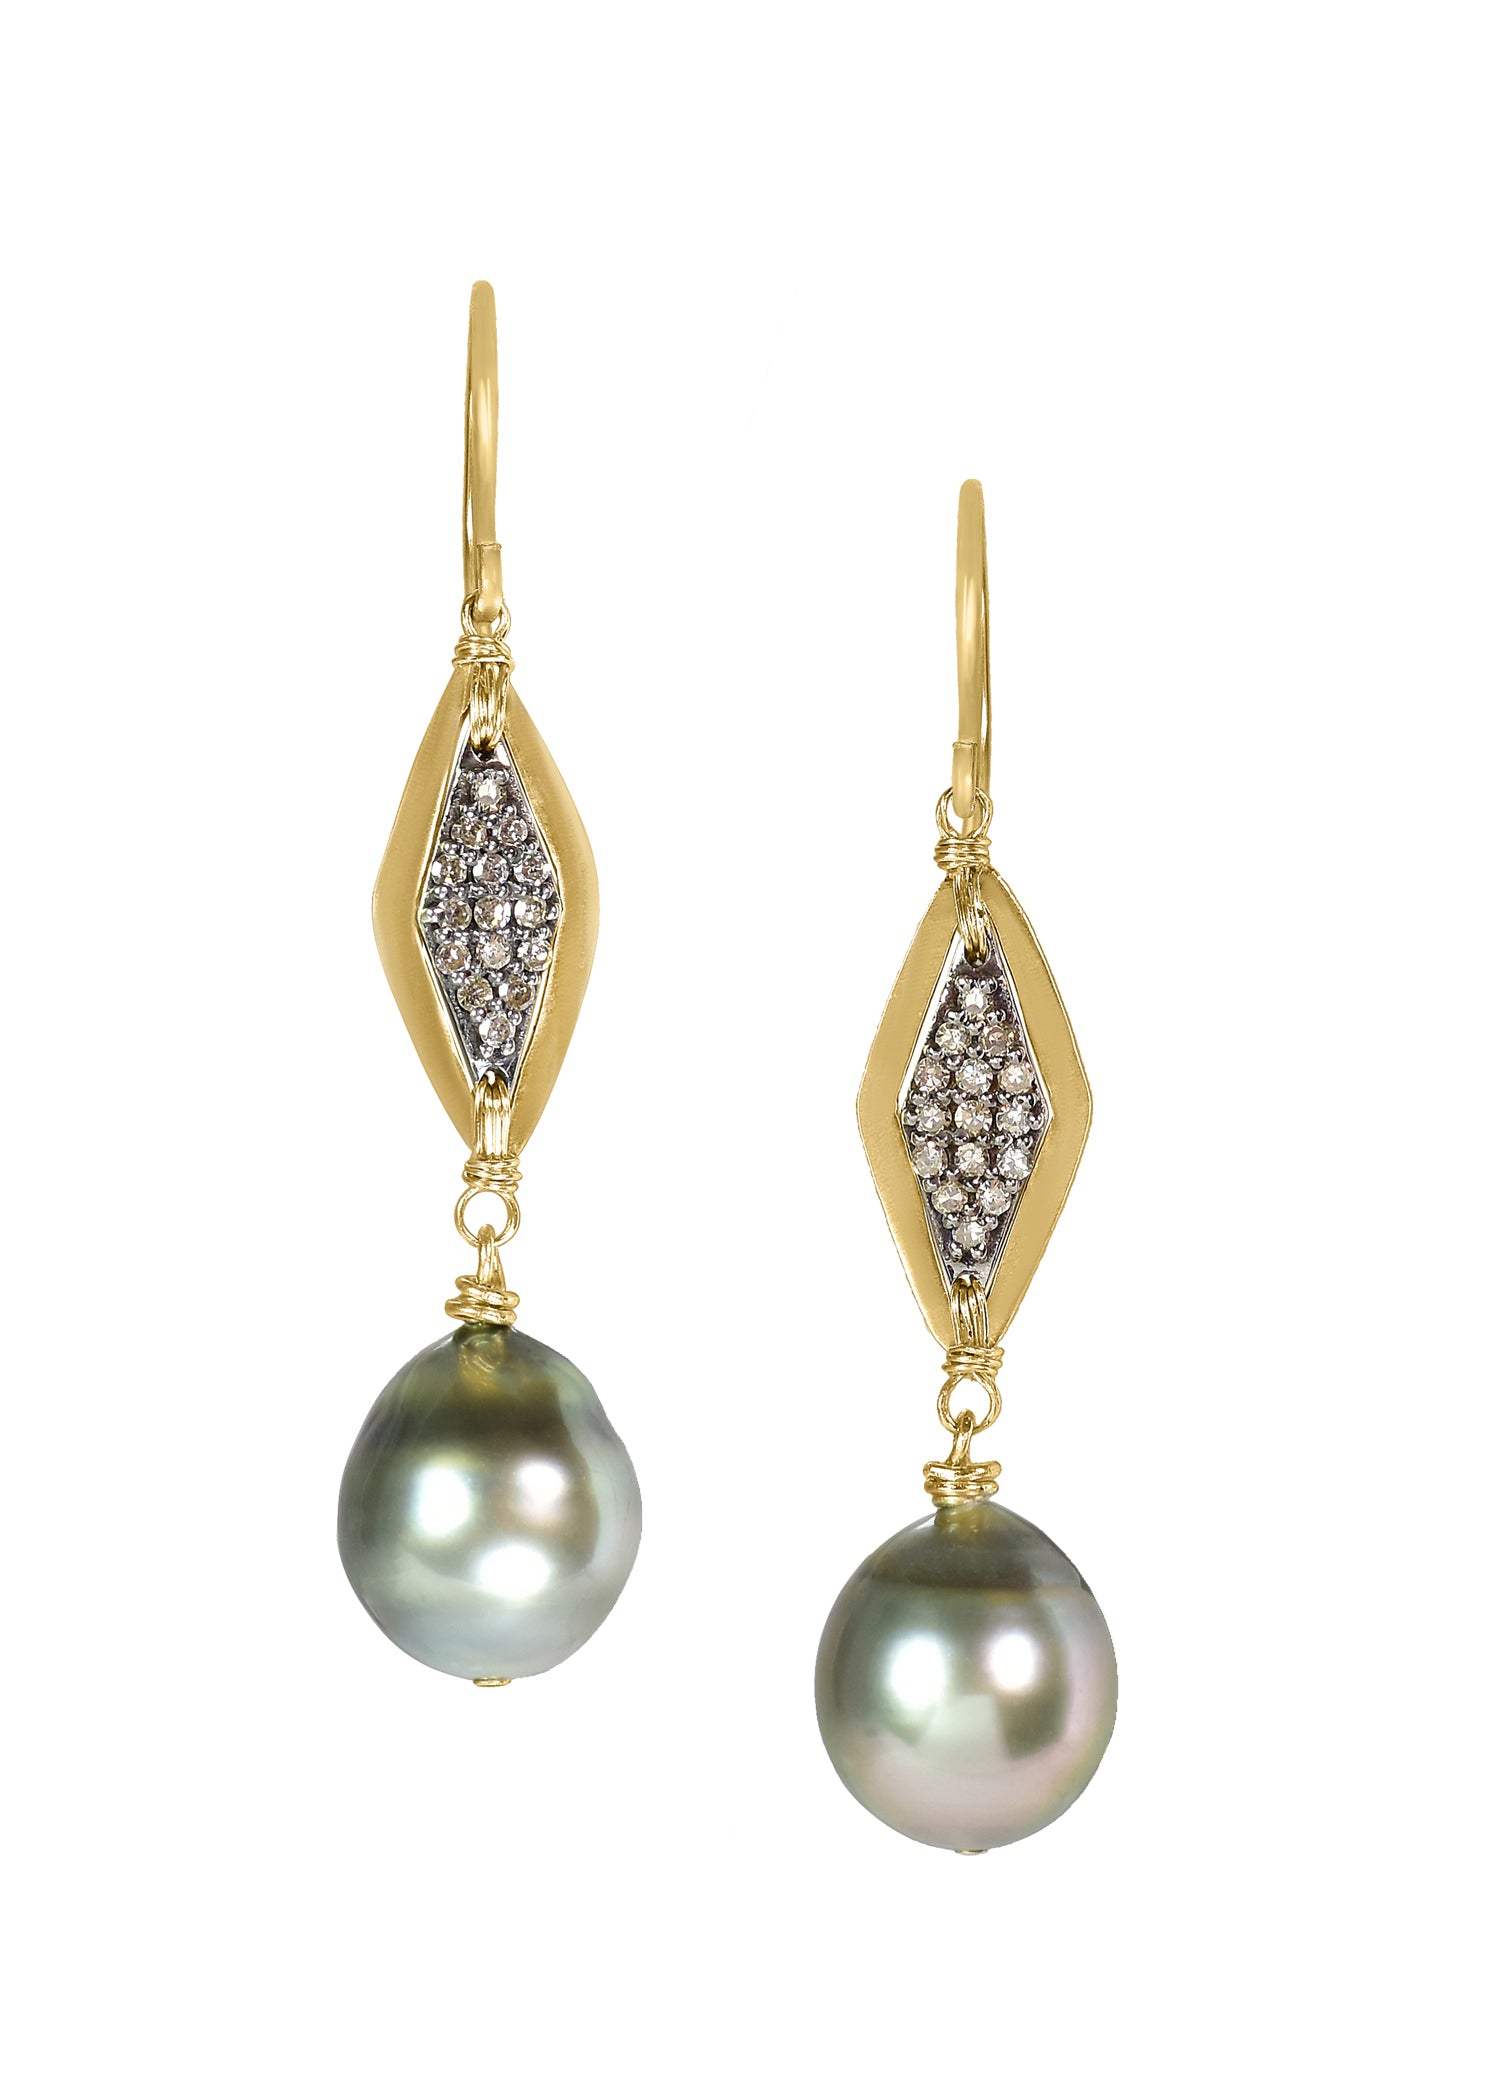 Diamond Tahitian pearl 14k gold Sterling silver Mixed metal Special order only Earrings measure 1-5/8" in length (including the ear wires) and 3/8" across the widest point of the pearl Handmade in our Los Angeles studio